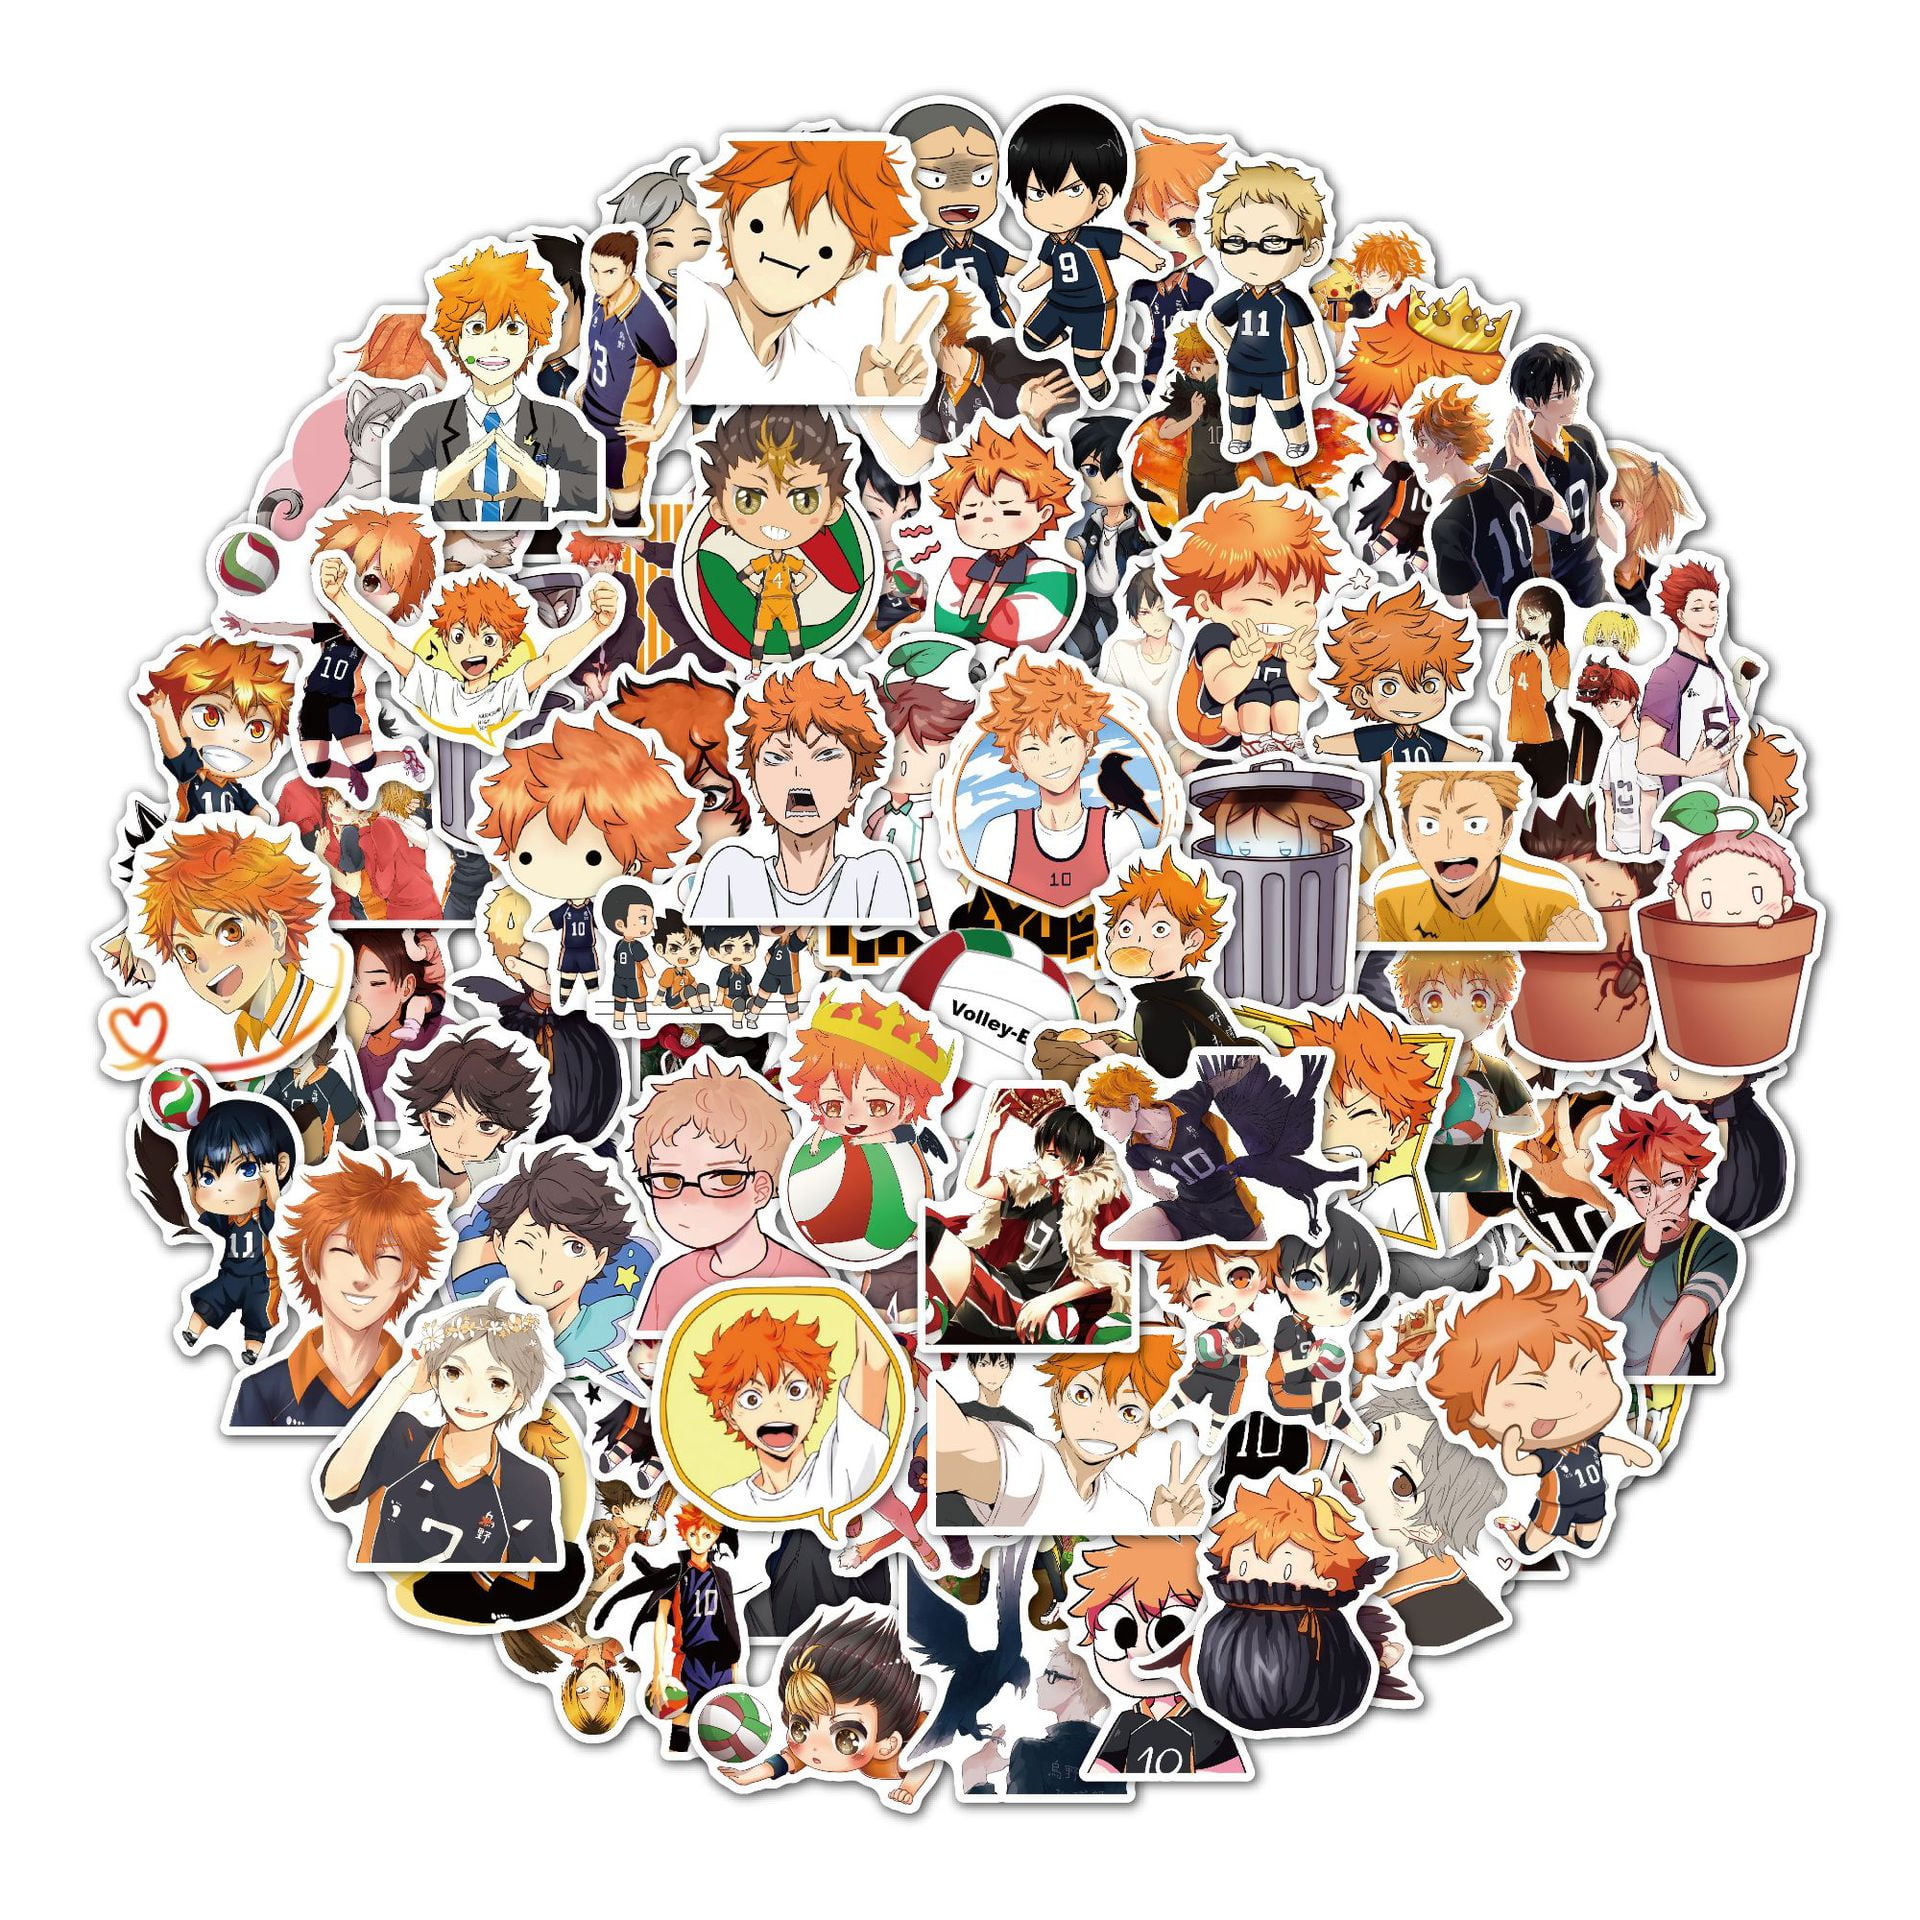 P-o-k-e-m-o-n-100 Attactive Anime Cartoon Stickers for Laptop Computer Flasks Phone Case Luggage Car Tablet Bike,Decortive Waterproof Vinyl Decals 100 Pcs Cute Stickers for Pokemon to Boys Girls 